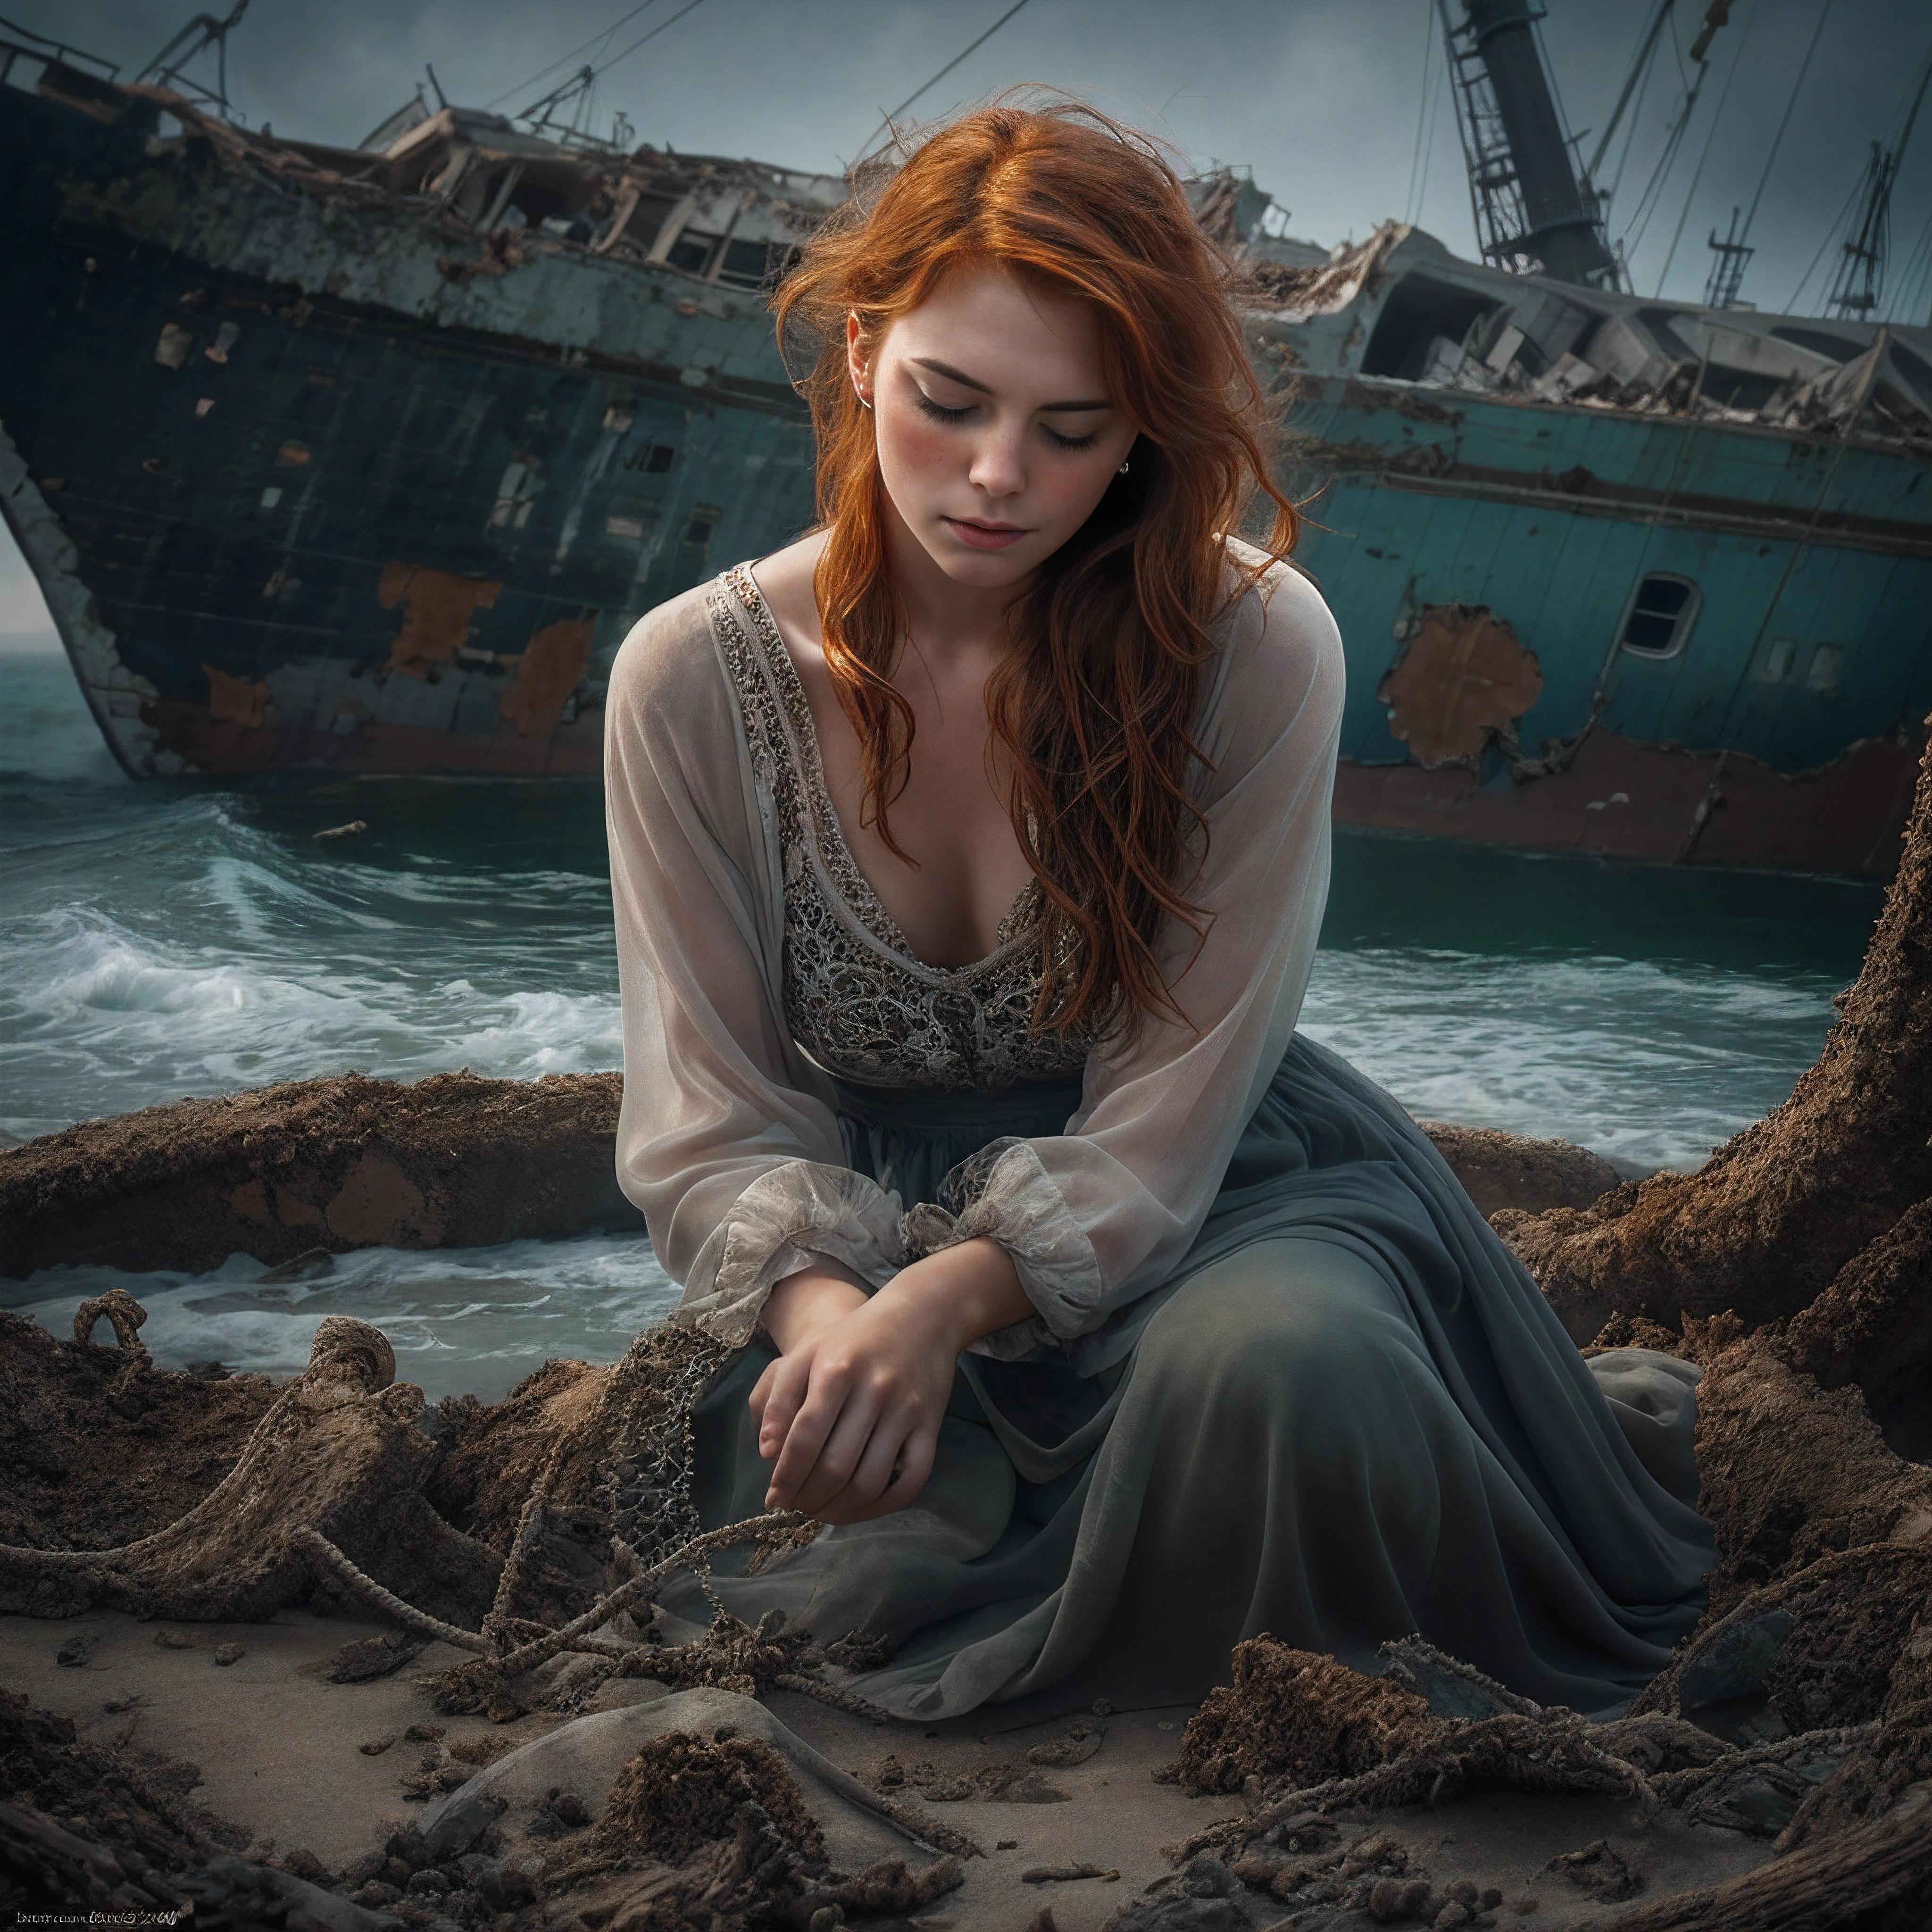 An exquisite portrait depicting a beautiful redheaded woman kneeling peacefully amidst the remains of a shipwreck, eyes closed in pensive thought, delicate features caressed by ocean mist, flawless skin adorned with endearing freckles, fiery locks softly blowing in the seabreeze, masterfully composed in the style of a fine art photographic print, tonality rich and atmospherically moody like a cinematic still, intricate textures and film grain integrated seamlessly, overall craftsmanship superbly executed with extraordinary attention to detail, this profound digital painting epitomizes photorealism meets imaginative artistry.